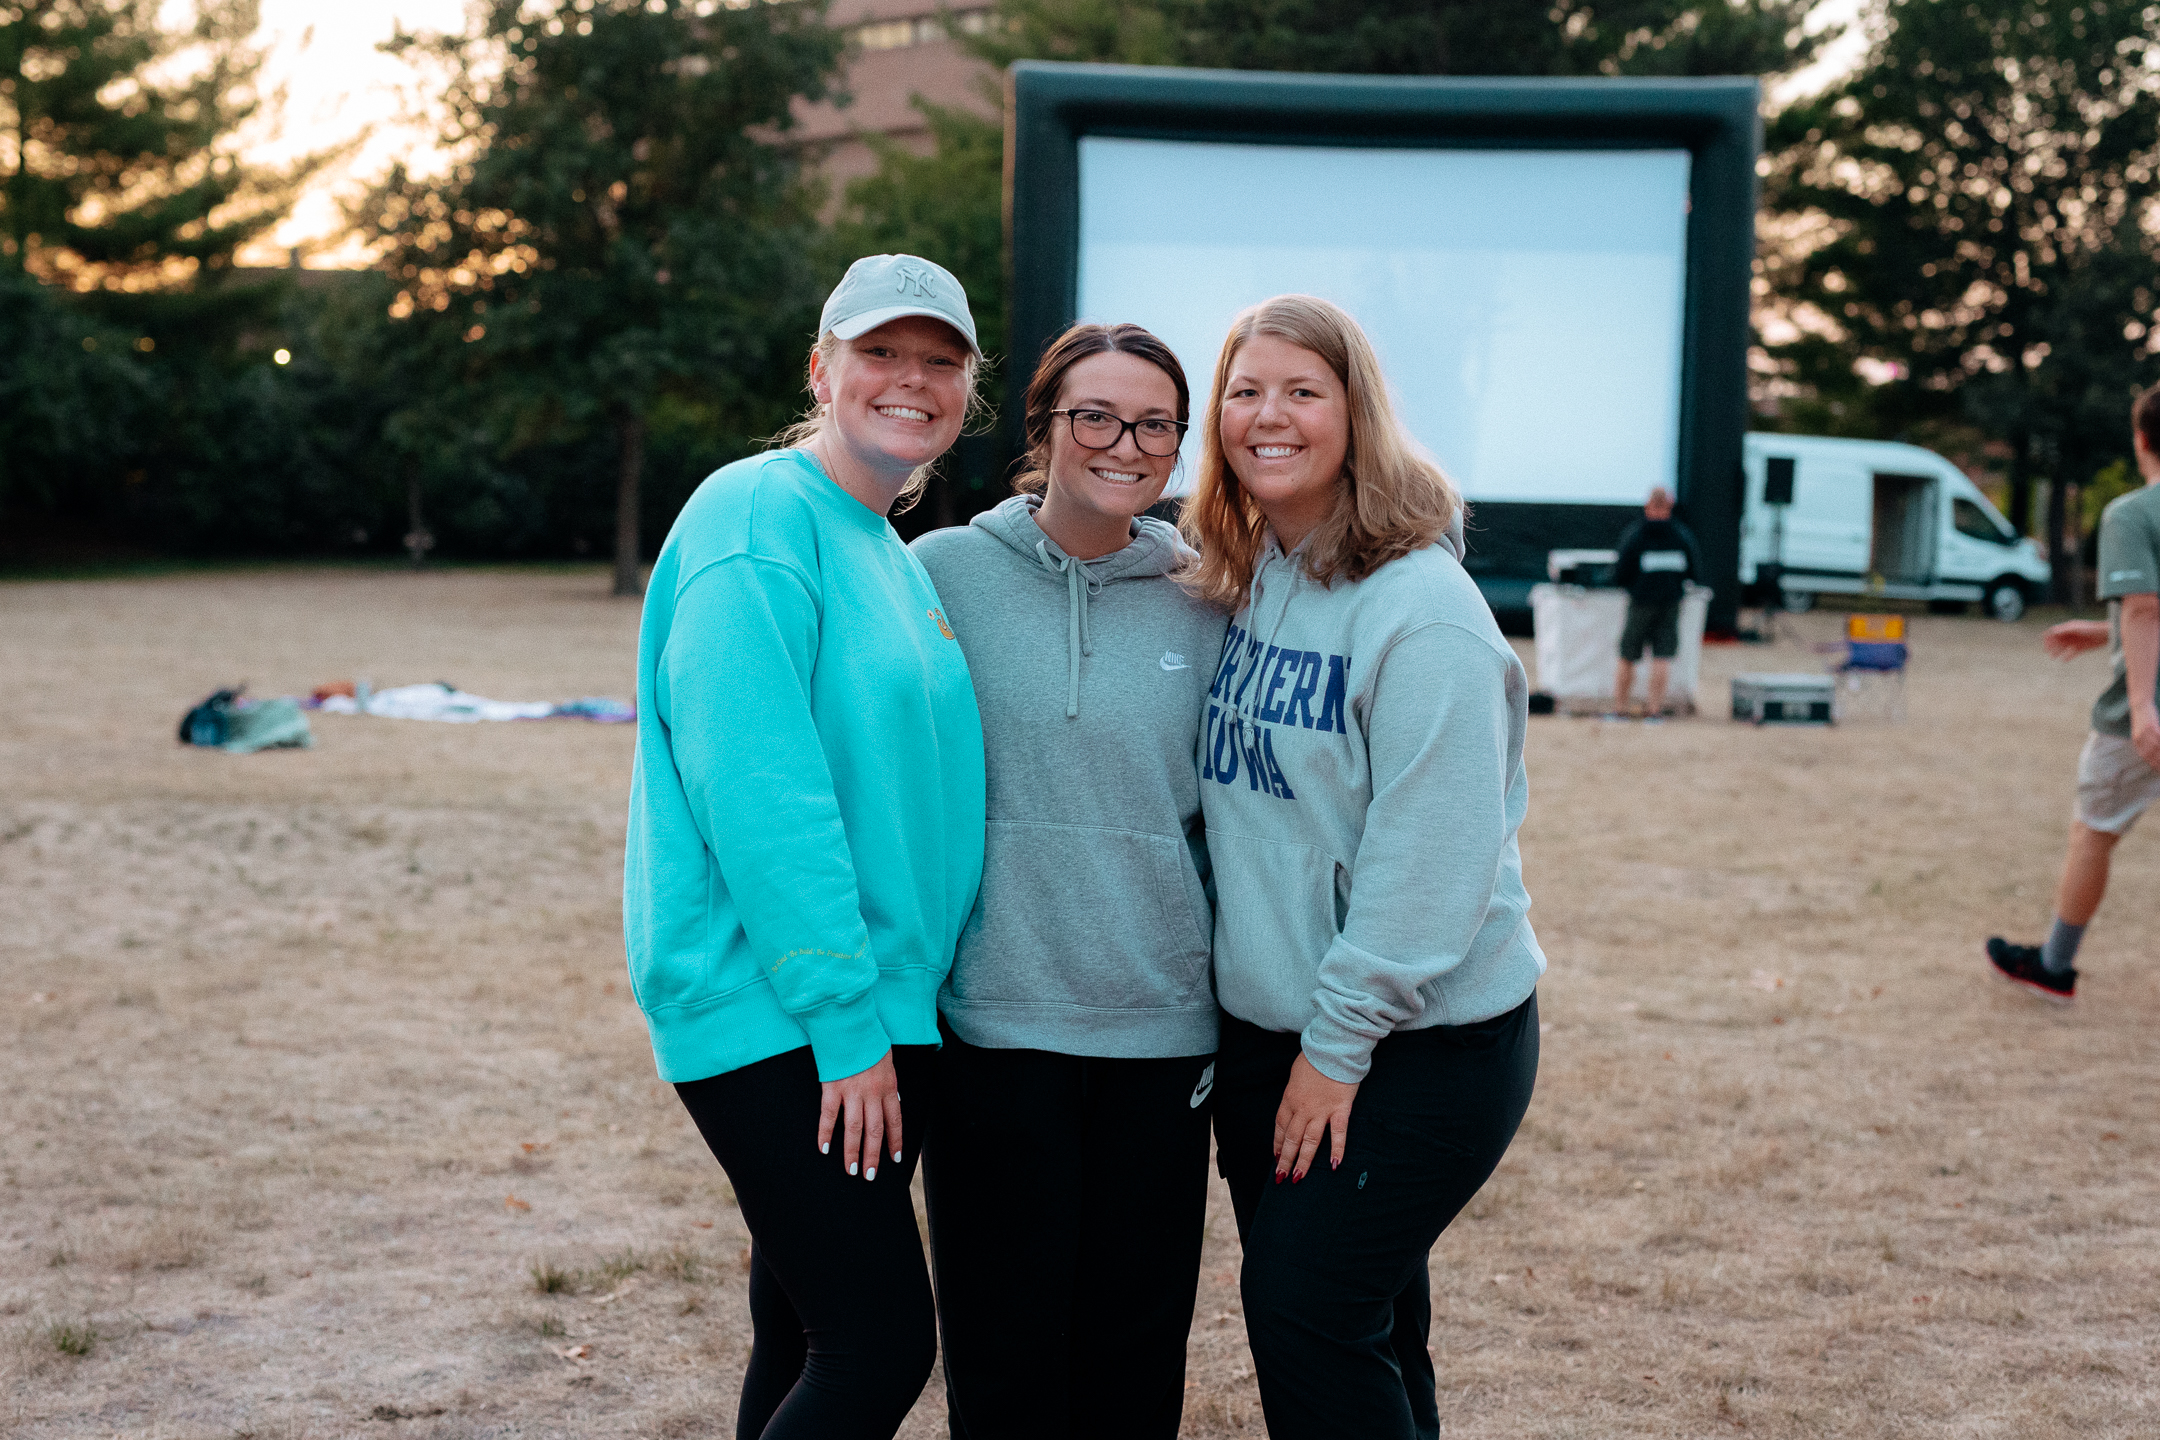 Students standing near an outdoor movie screen